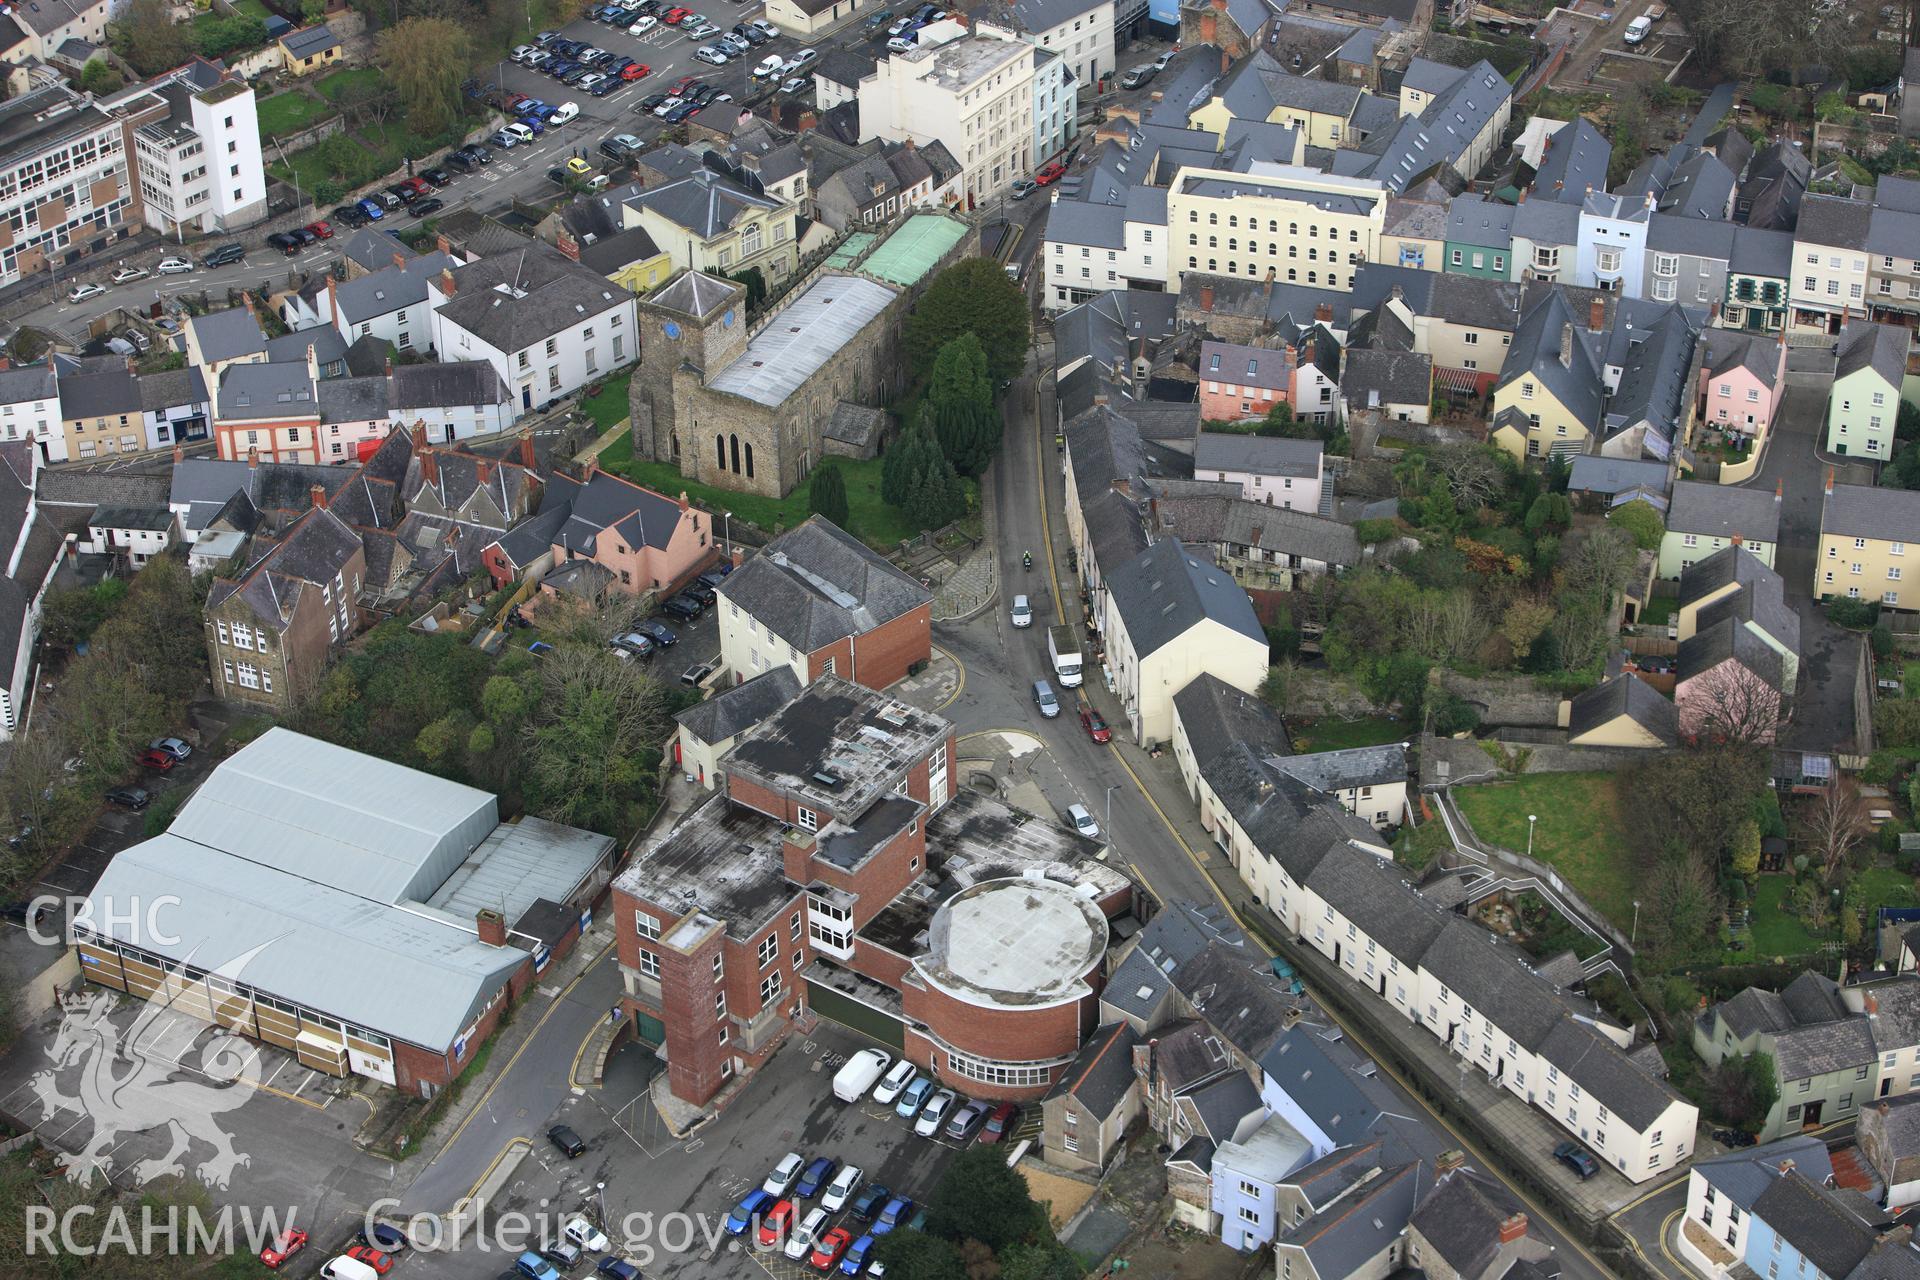 RCAHMW colour oblique aerial photograph of Haverfordwest Taken on 09 November 2009 by Toby Driver